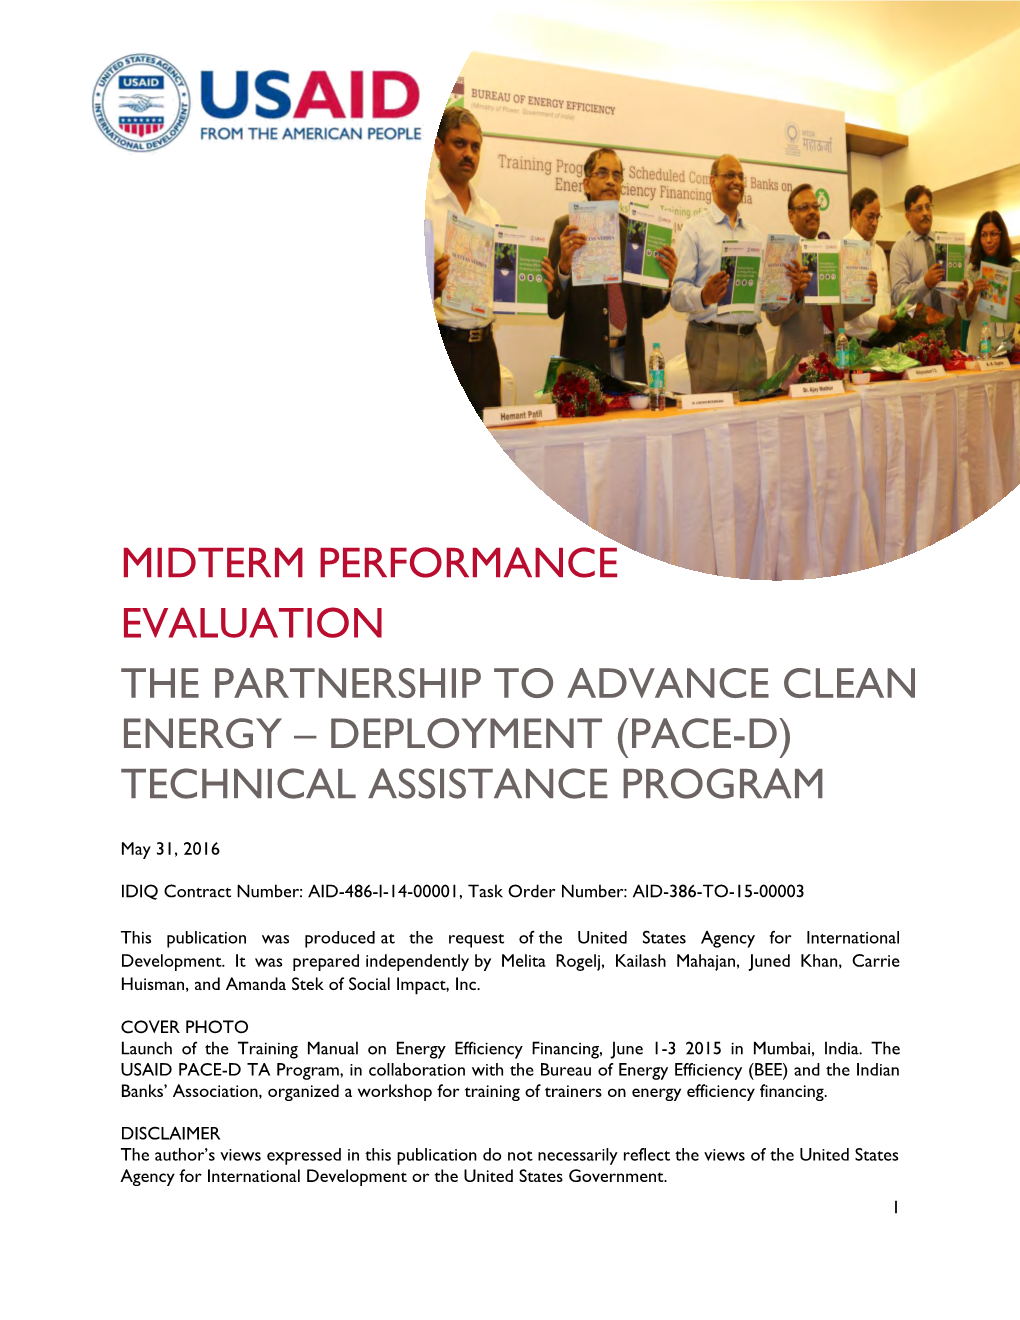 Midterm Performance Evaluation the Partnership to Advance Clean Energy – Deployment (Pace-D)